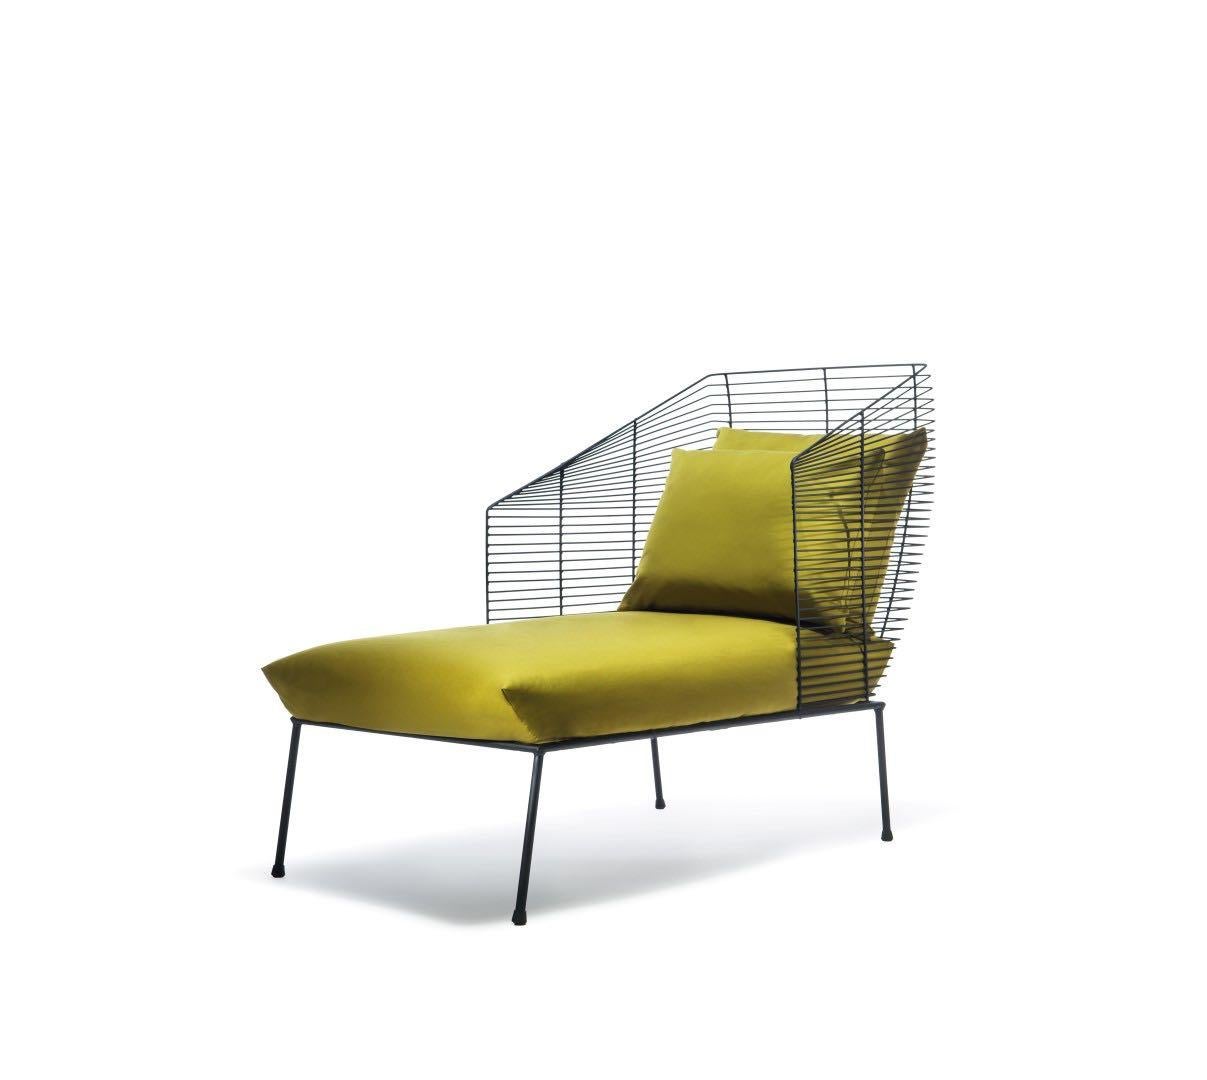 Modular settee. Contemporary artist. Fabric, color finishes etc all available by custom order.
Measures: H 93cm, L 165cm, P 60cm.
 